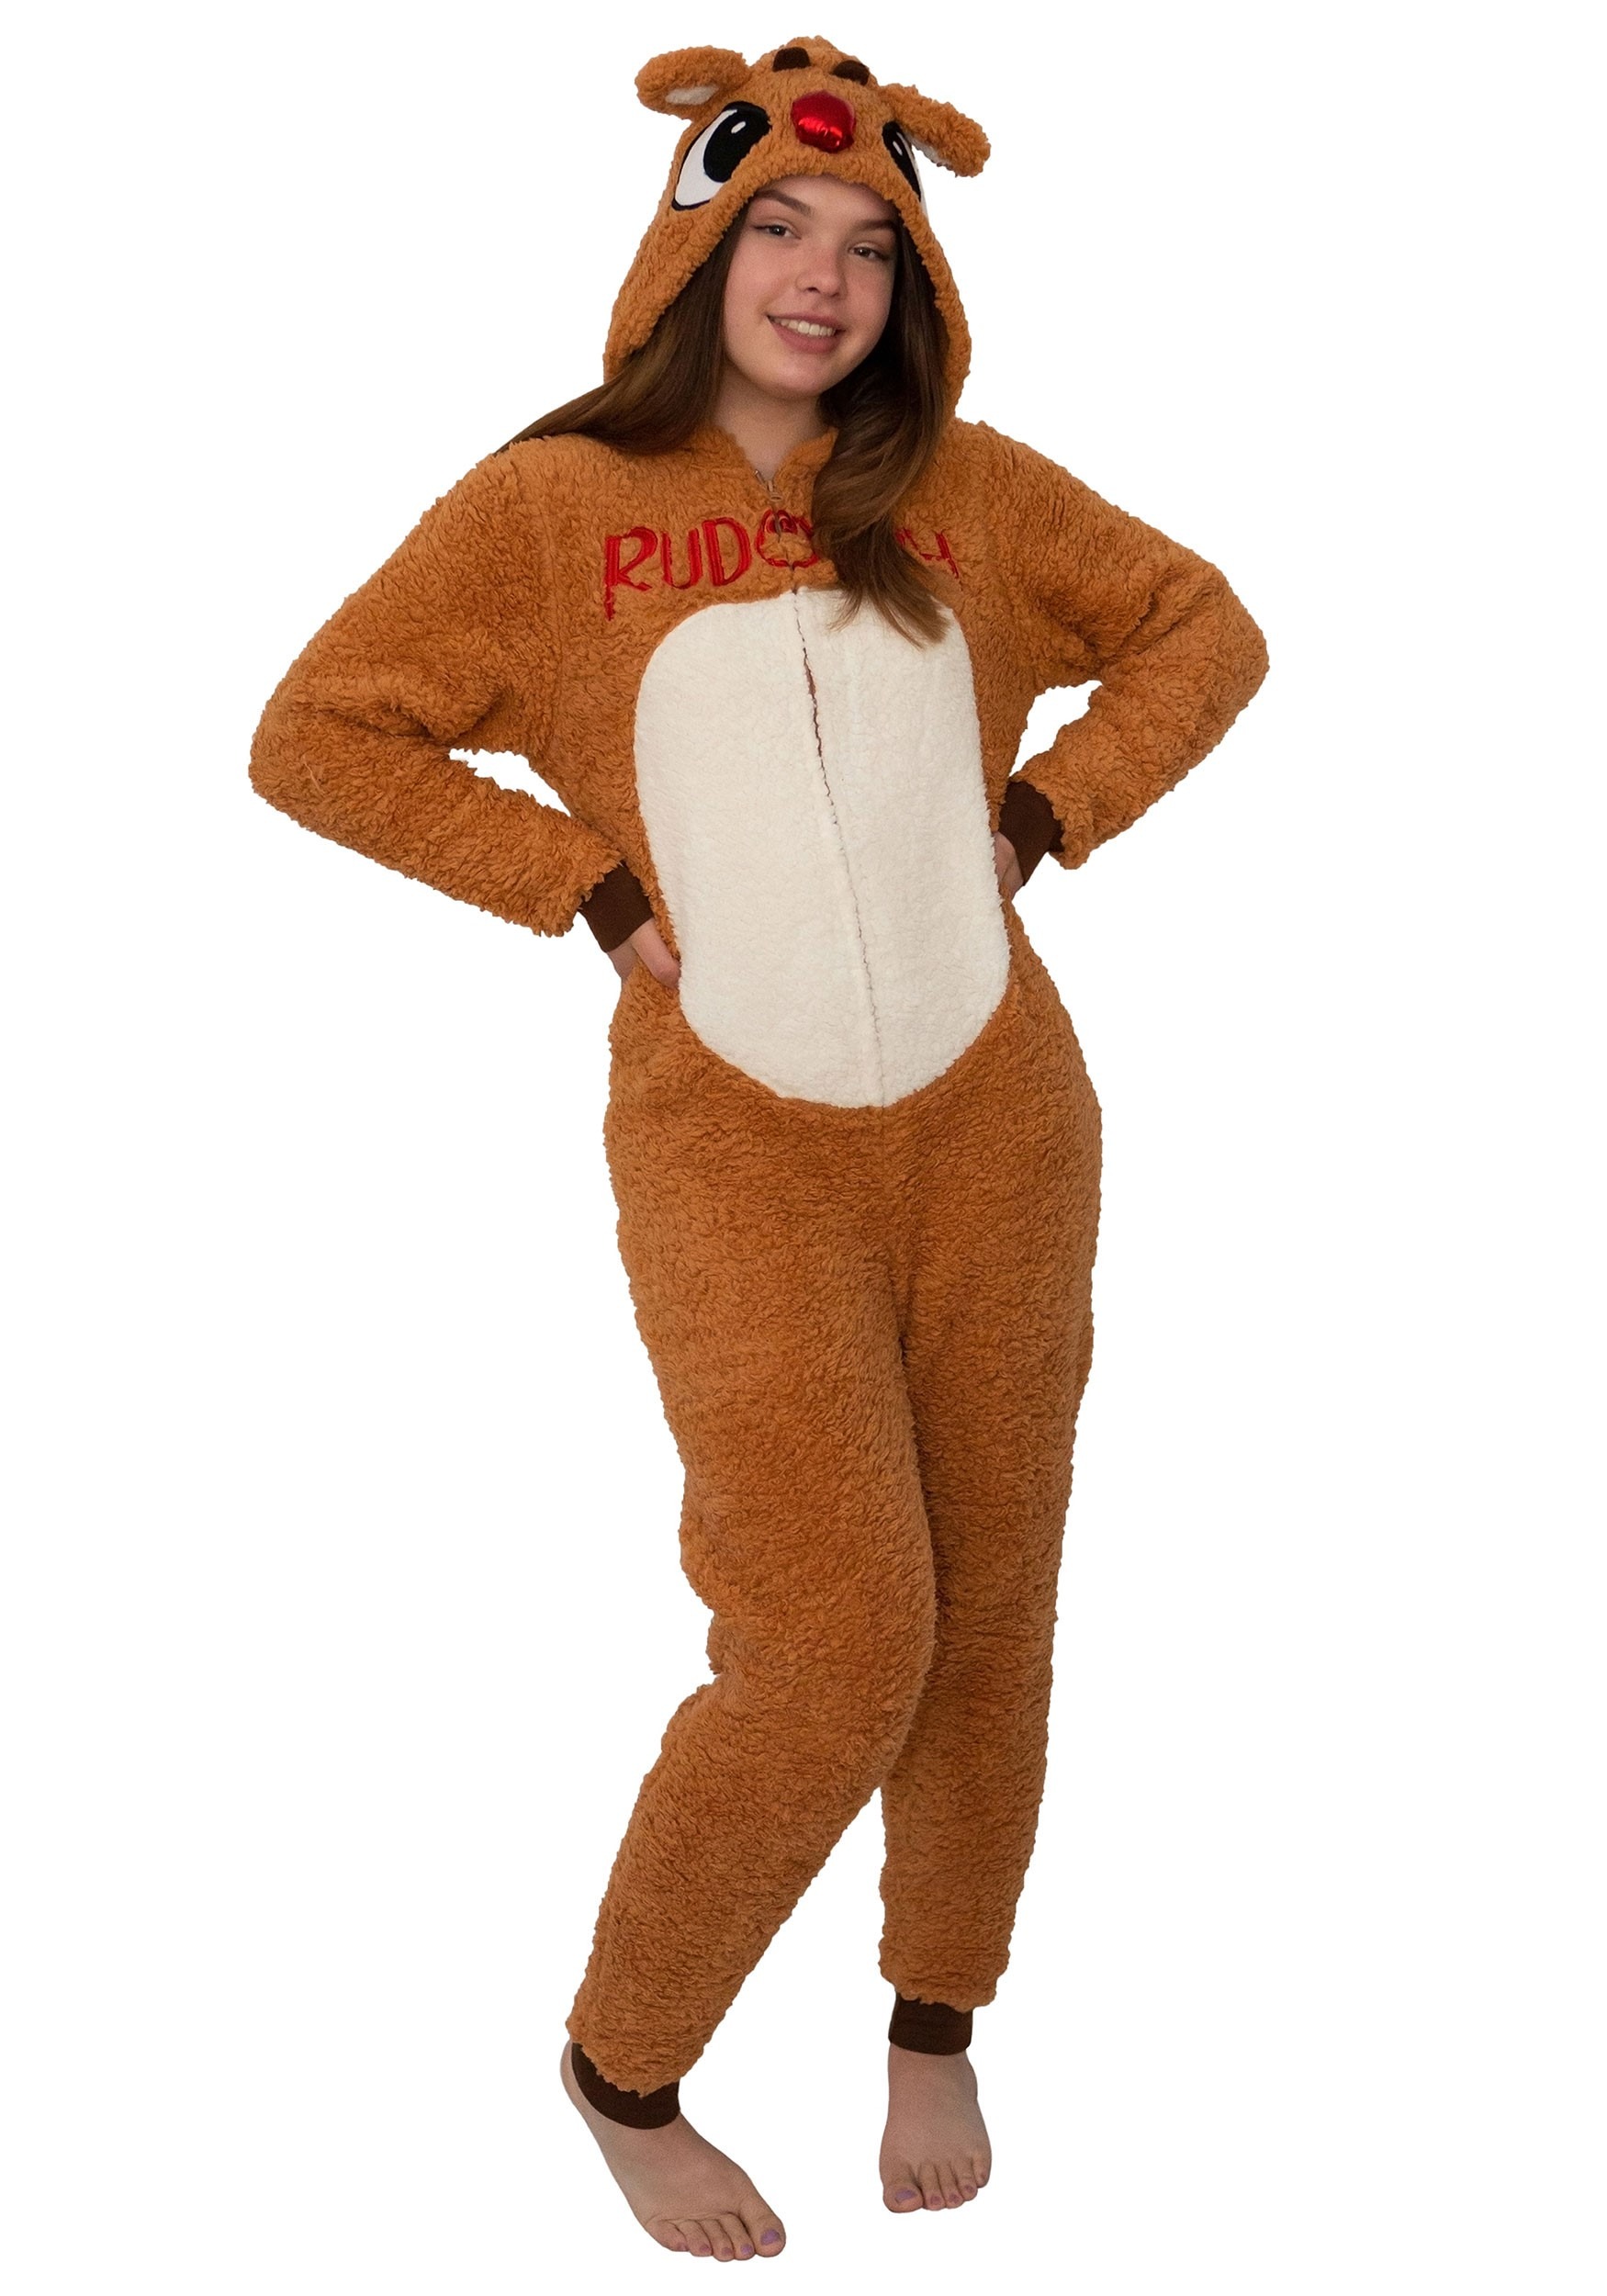 rudolph the red nosed reindeer outfit